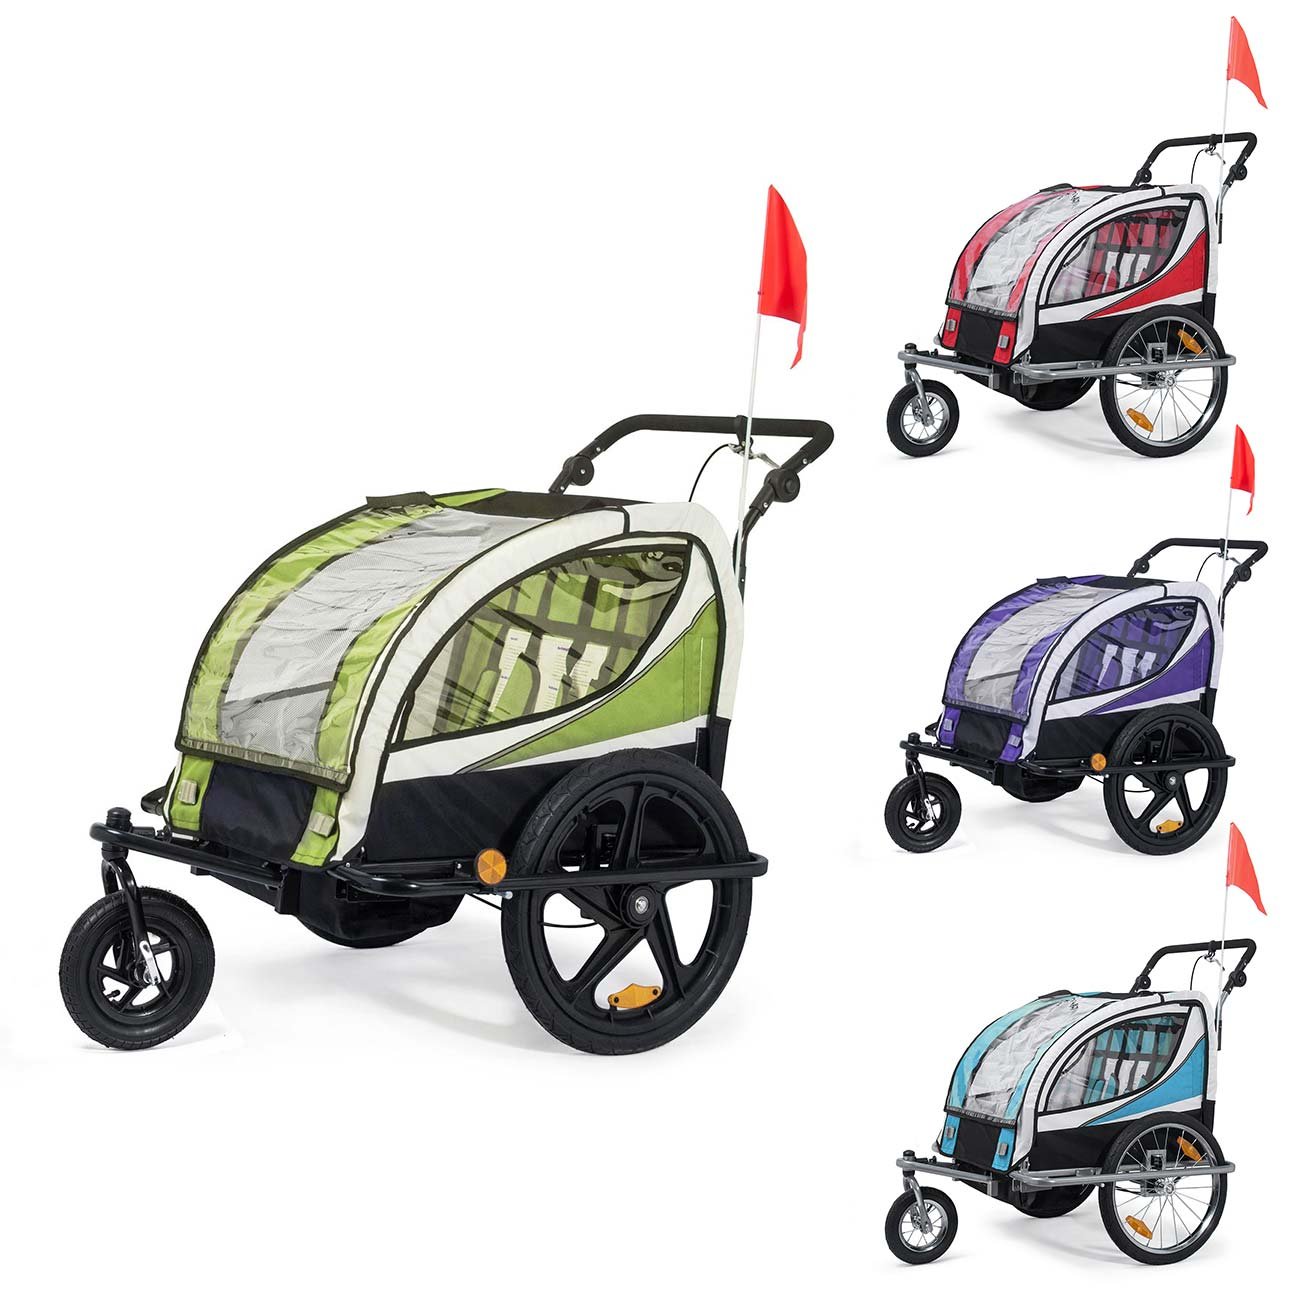 SAMAX Bicycle Trailer Jogger 2in1 360° Rotatable Children\'s Trailer Children\'s Bicycle Trailer Transport Trolley Fully Spring-Loaded Rear Axle for 2 Children - Other Colours Available